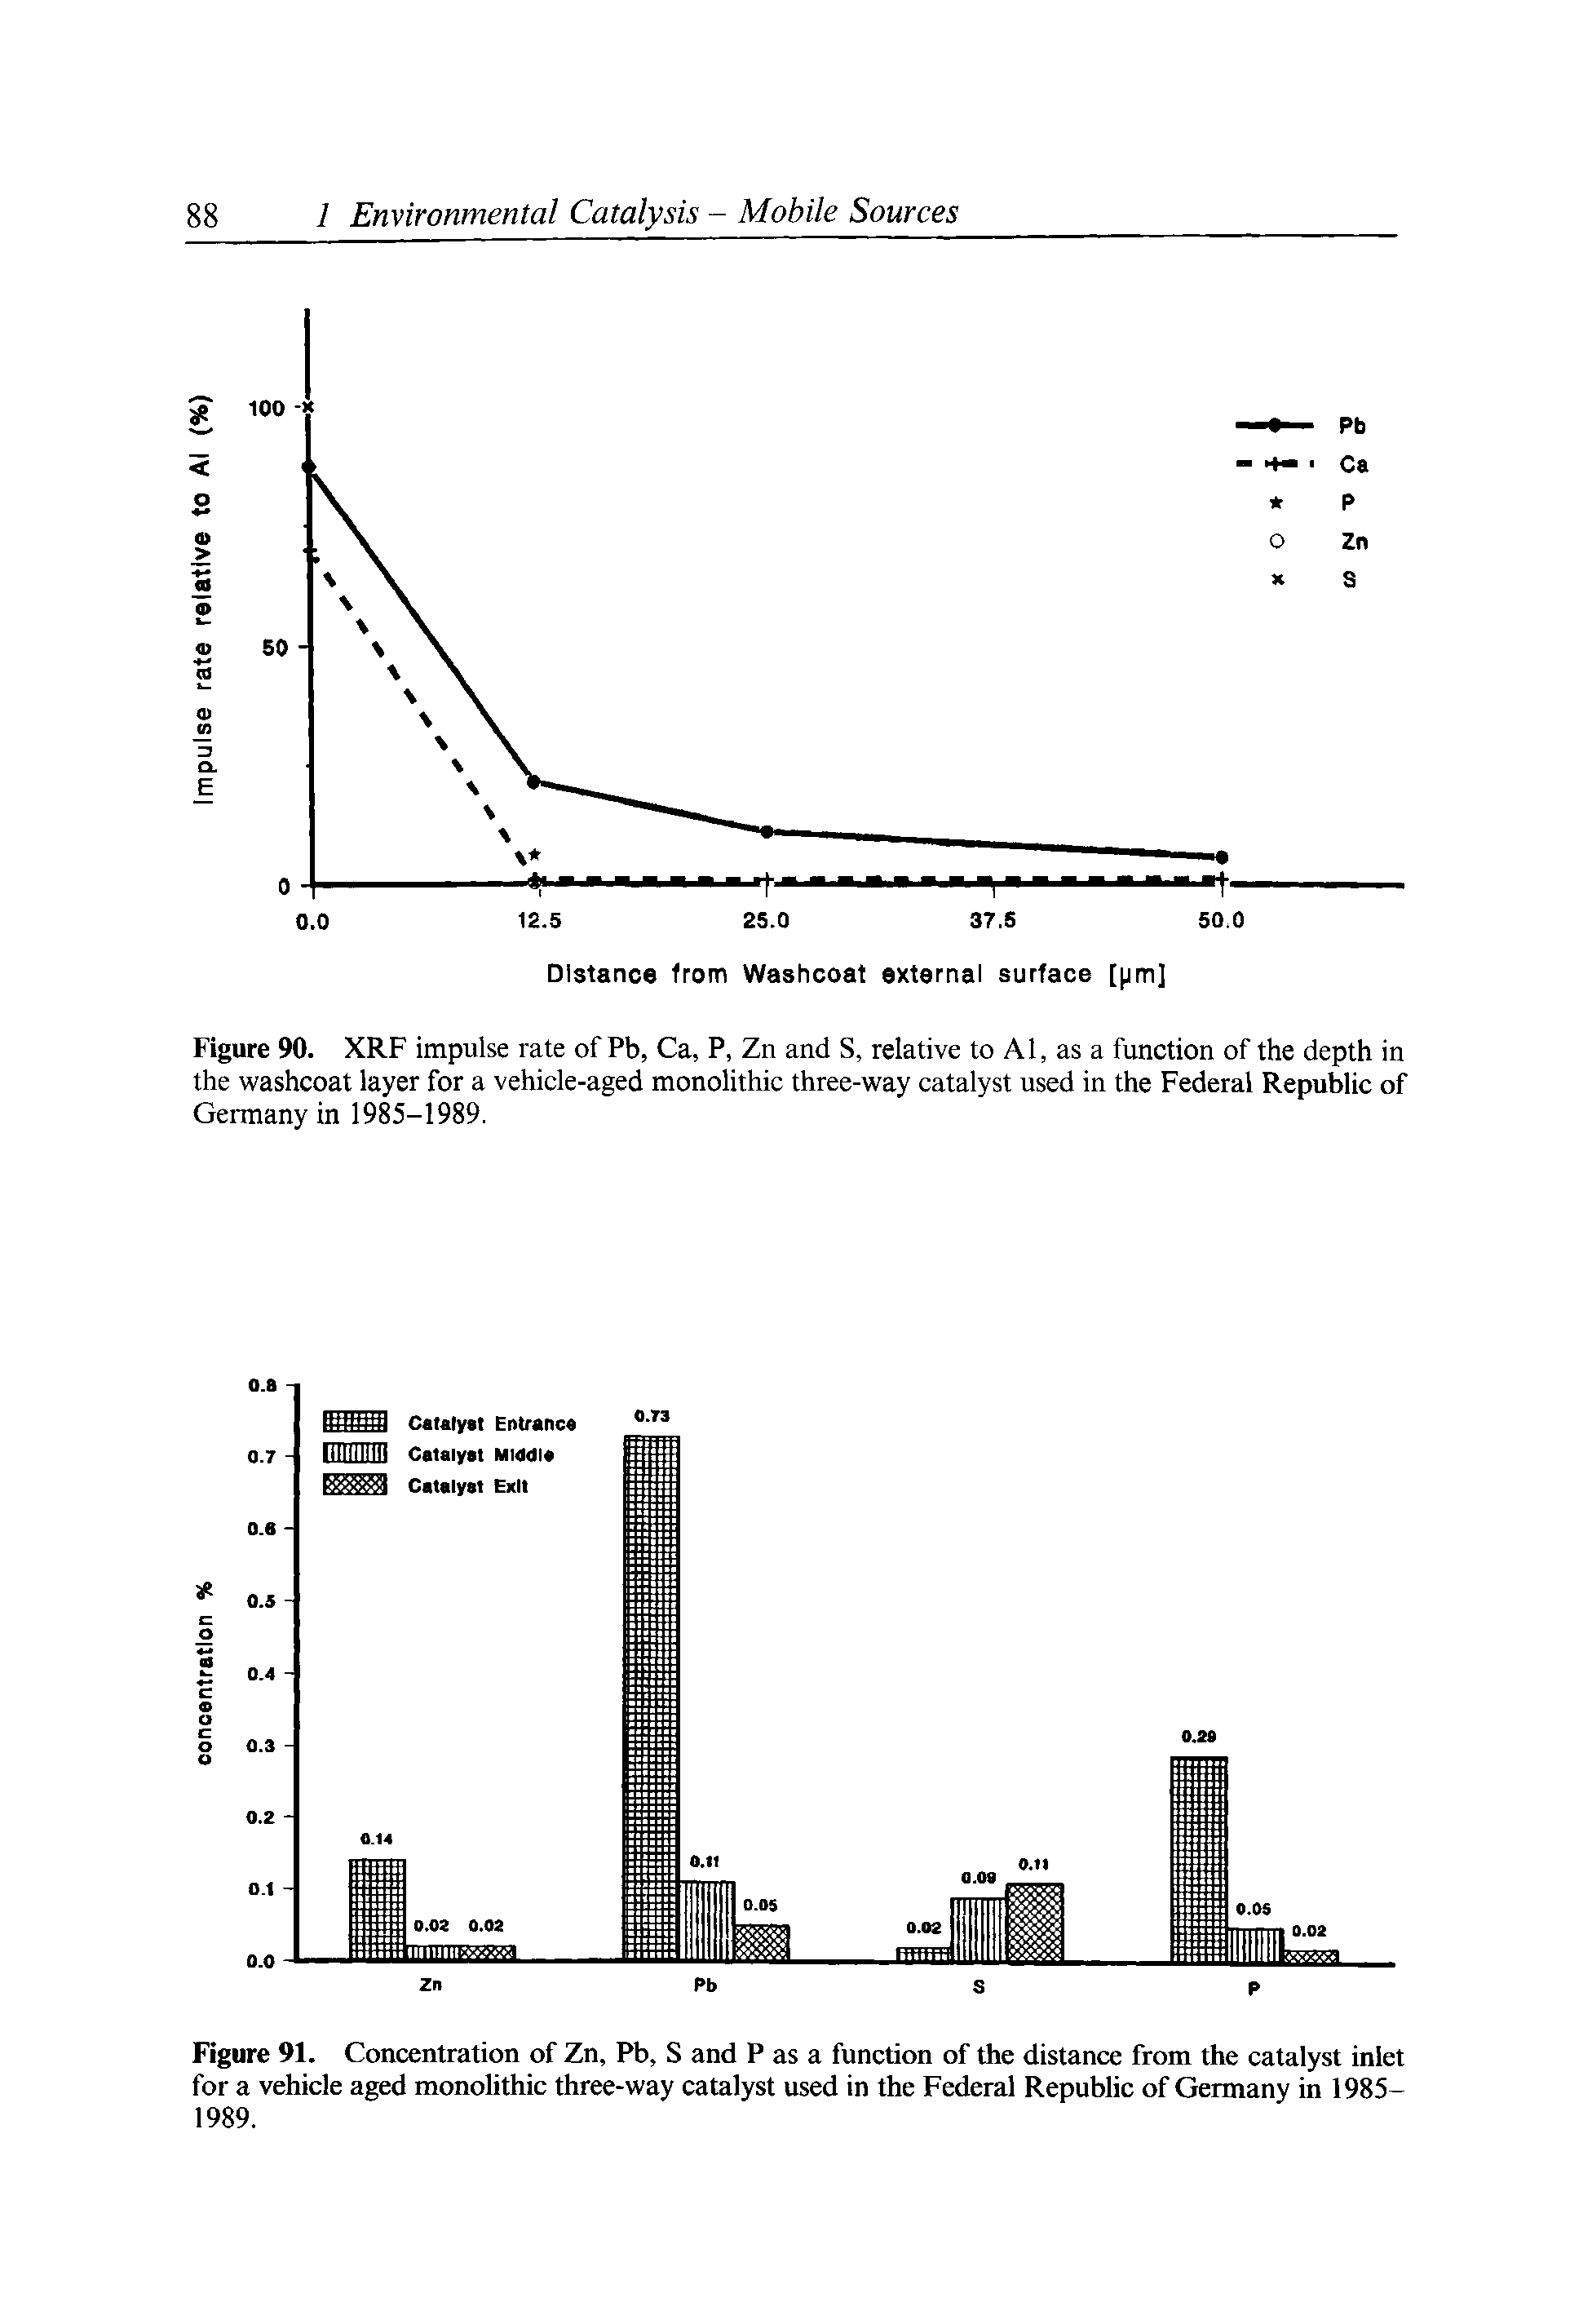 Figure 90. XRF impulse rate of Pb, Ca, P, Zn and S, relative to A1, as a function of the depth in the washcoat layer for a vehicle-aged monolithic three-way catalyst used in the Federal Republic of Germany in 1985-1989.